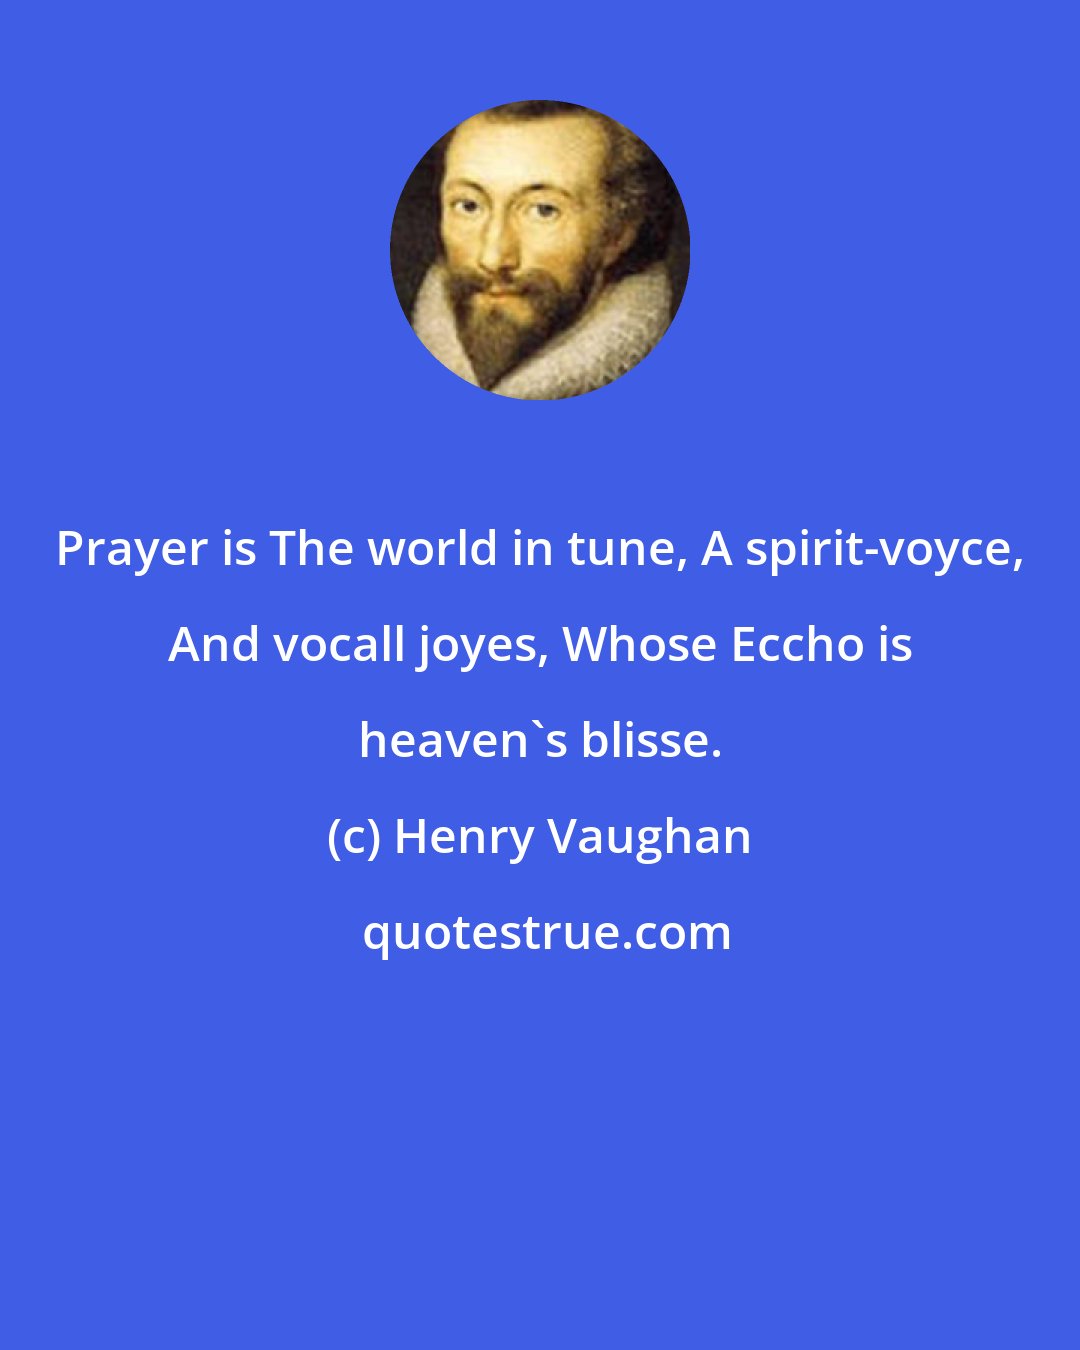 Henry Vaughan: Prayer is The world in tune, A spirit-voyce, And vocall joyes, Whose Eccho is heaven's blisse.